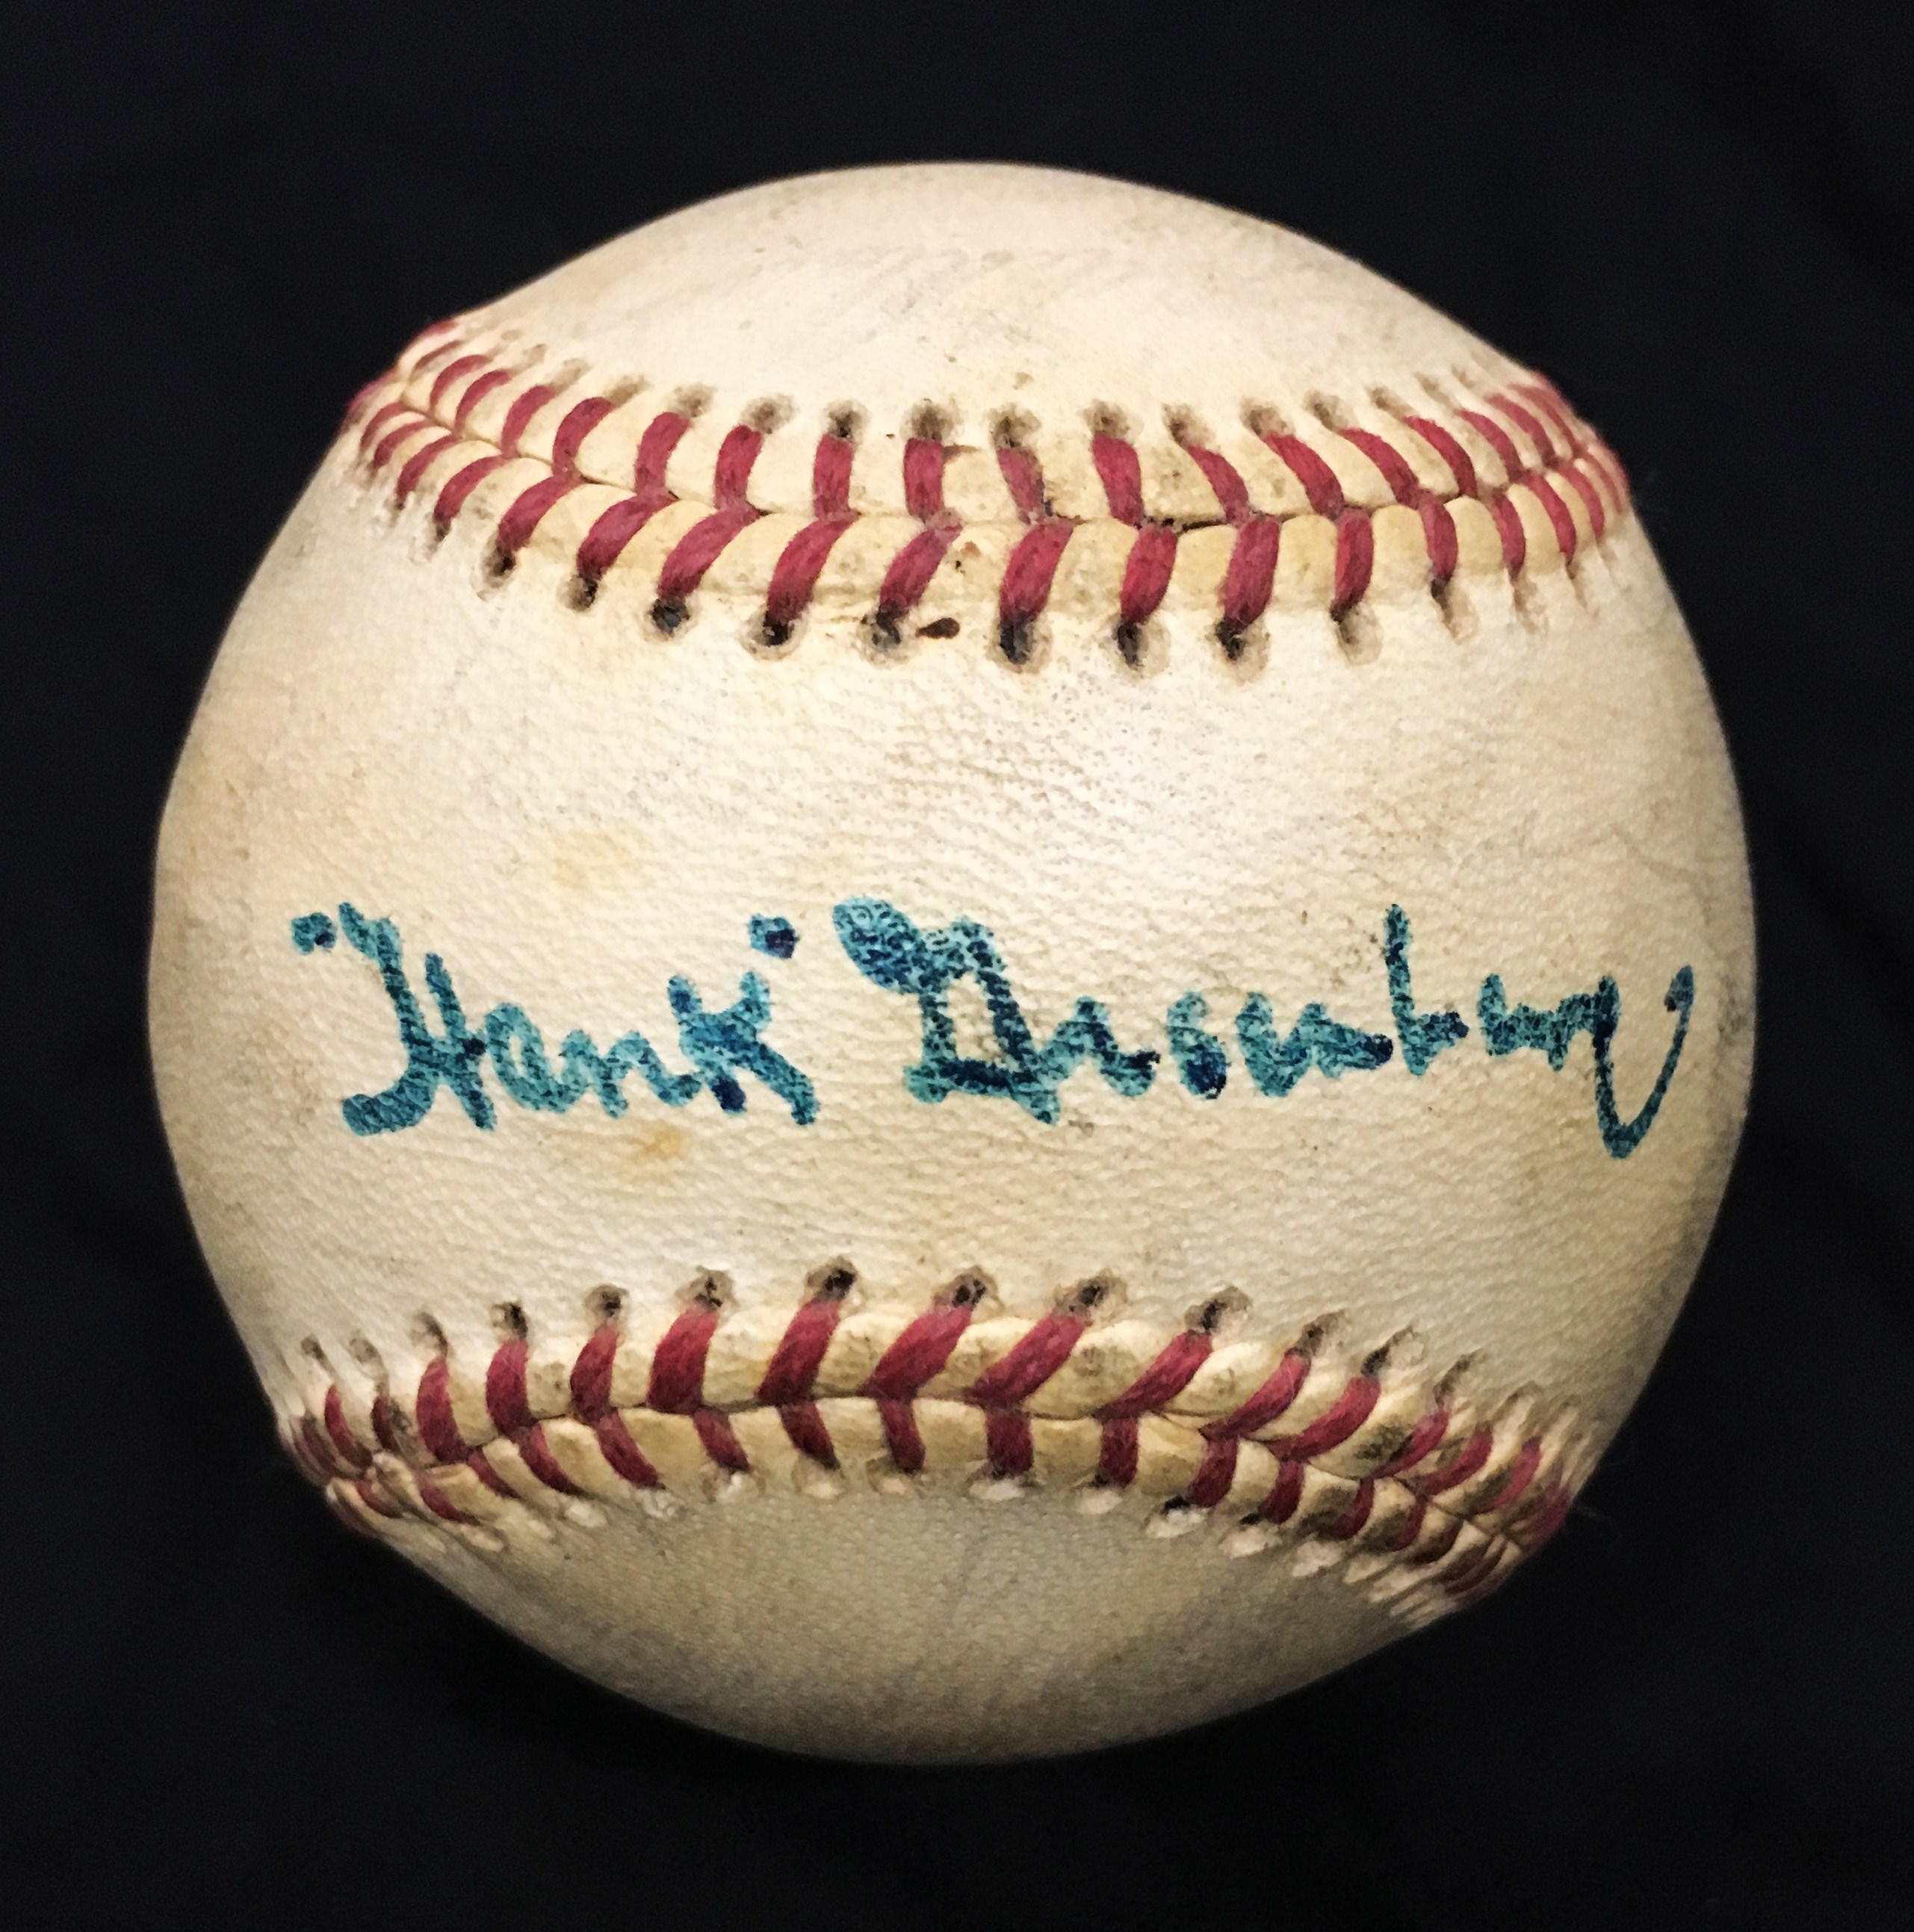 Ty Cobb and Detroit Tigers - 1981 Detroit Tigers Team Signed Baseball w/Hank Greenberg on Sweet Spot